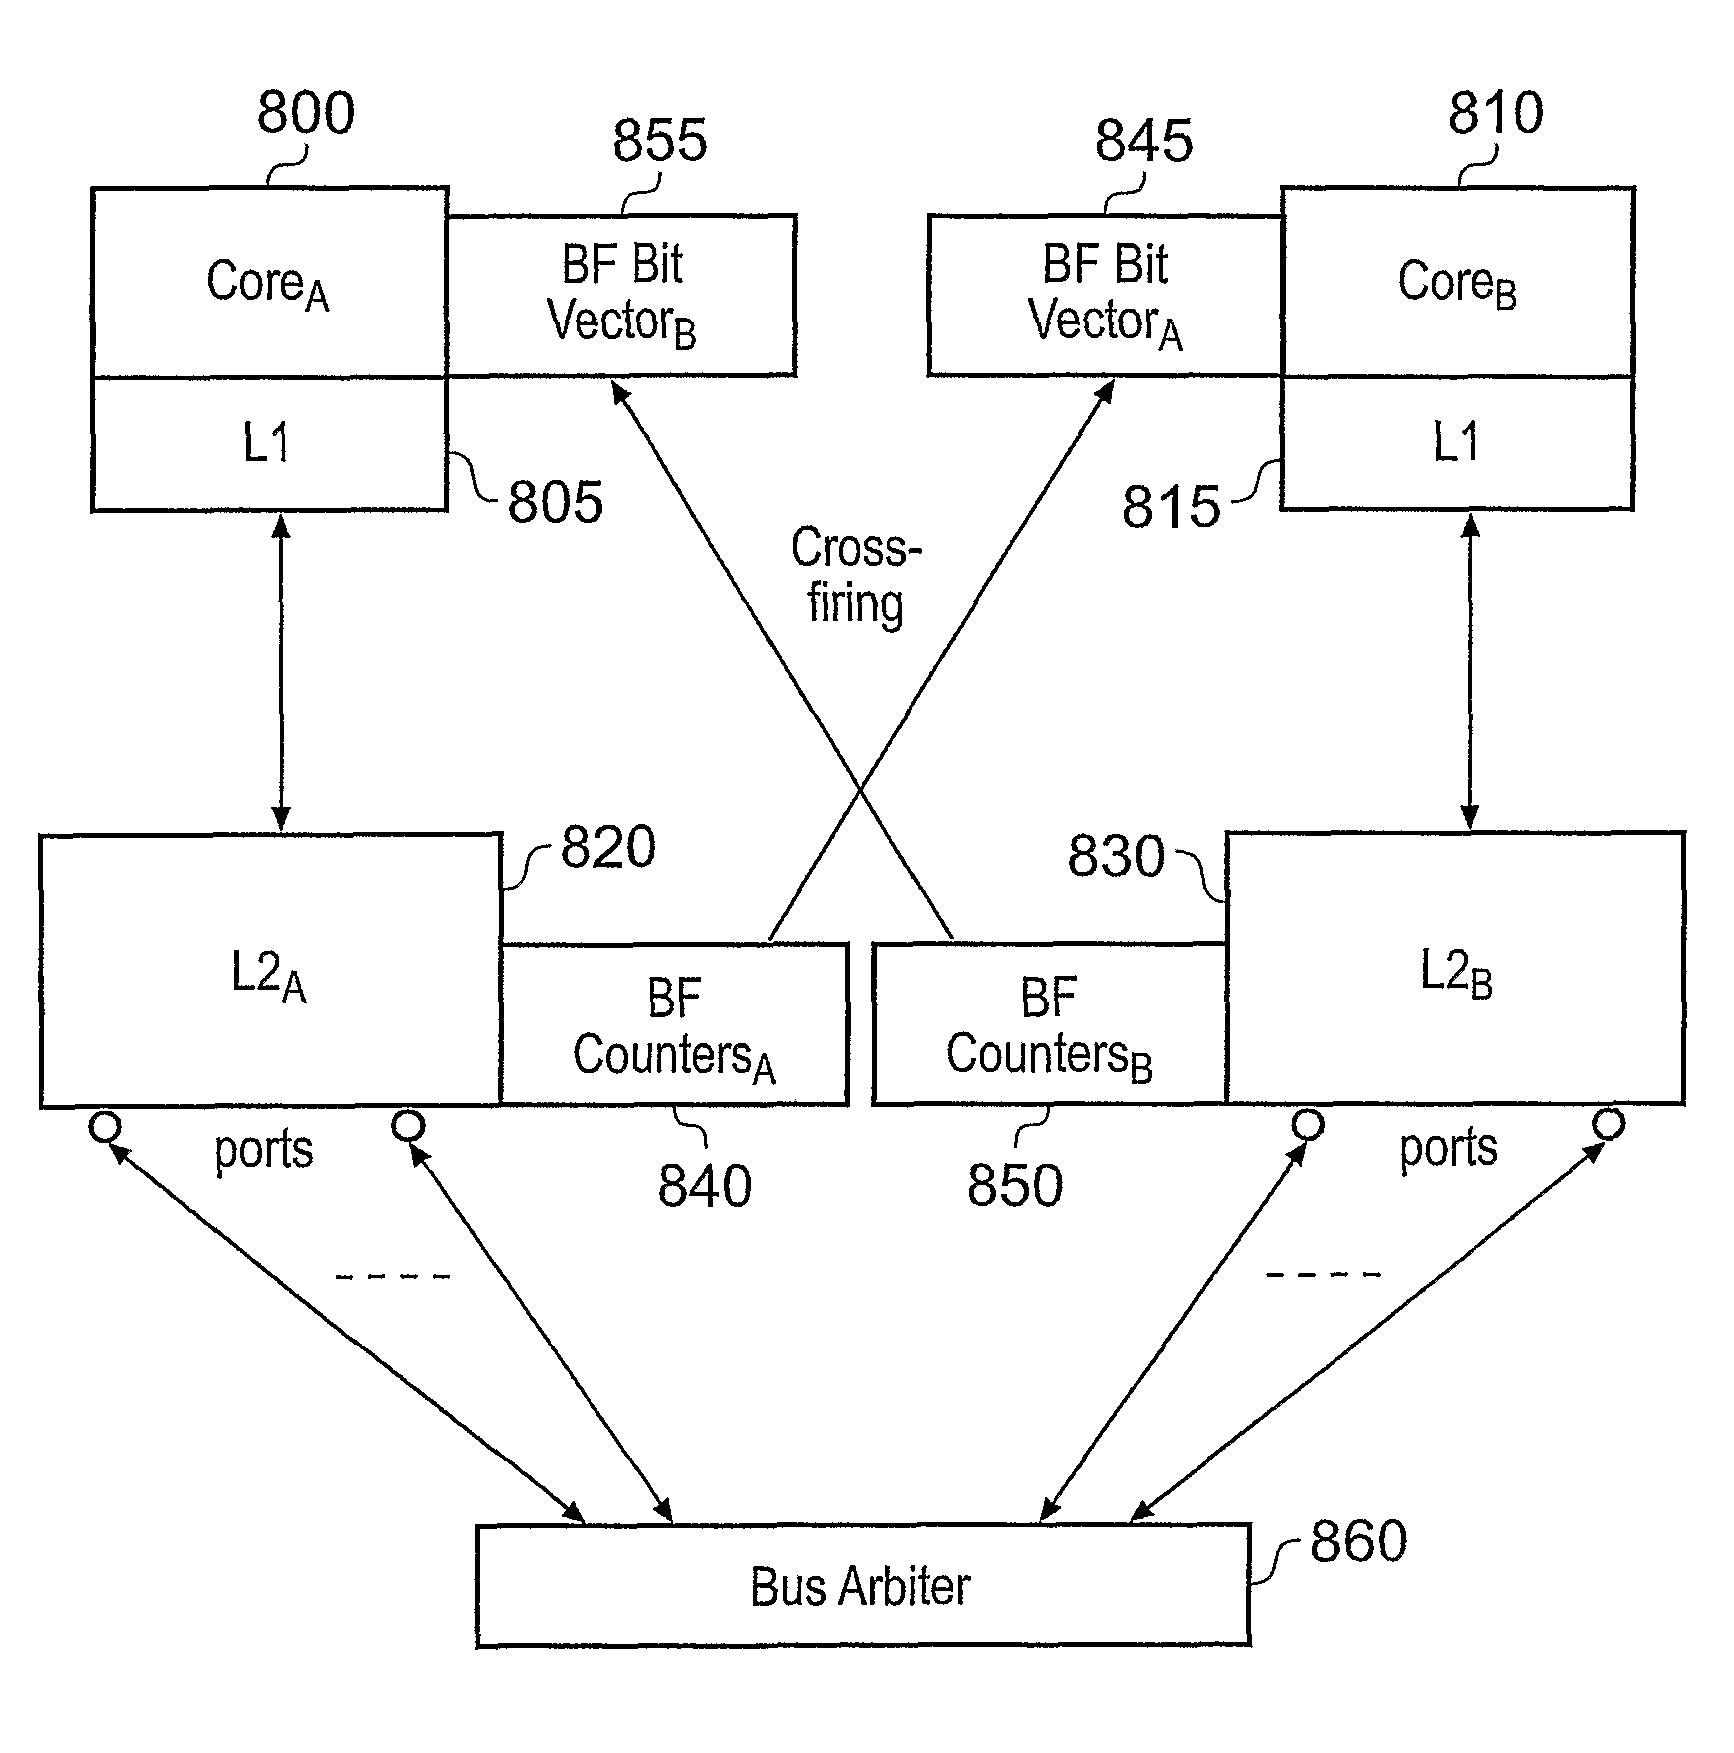 Cache miss detection in a data processing apparatus